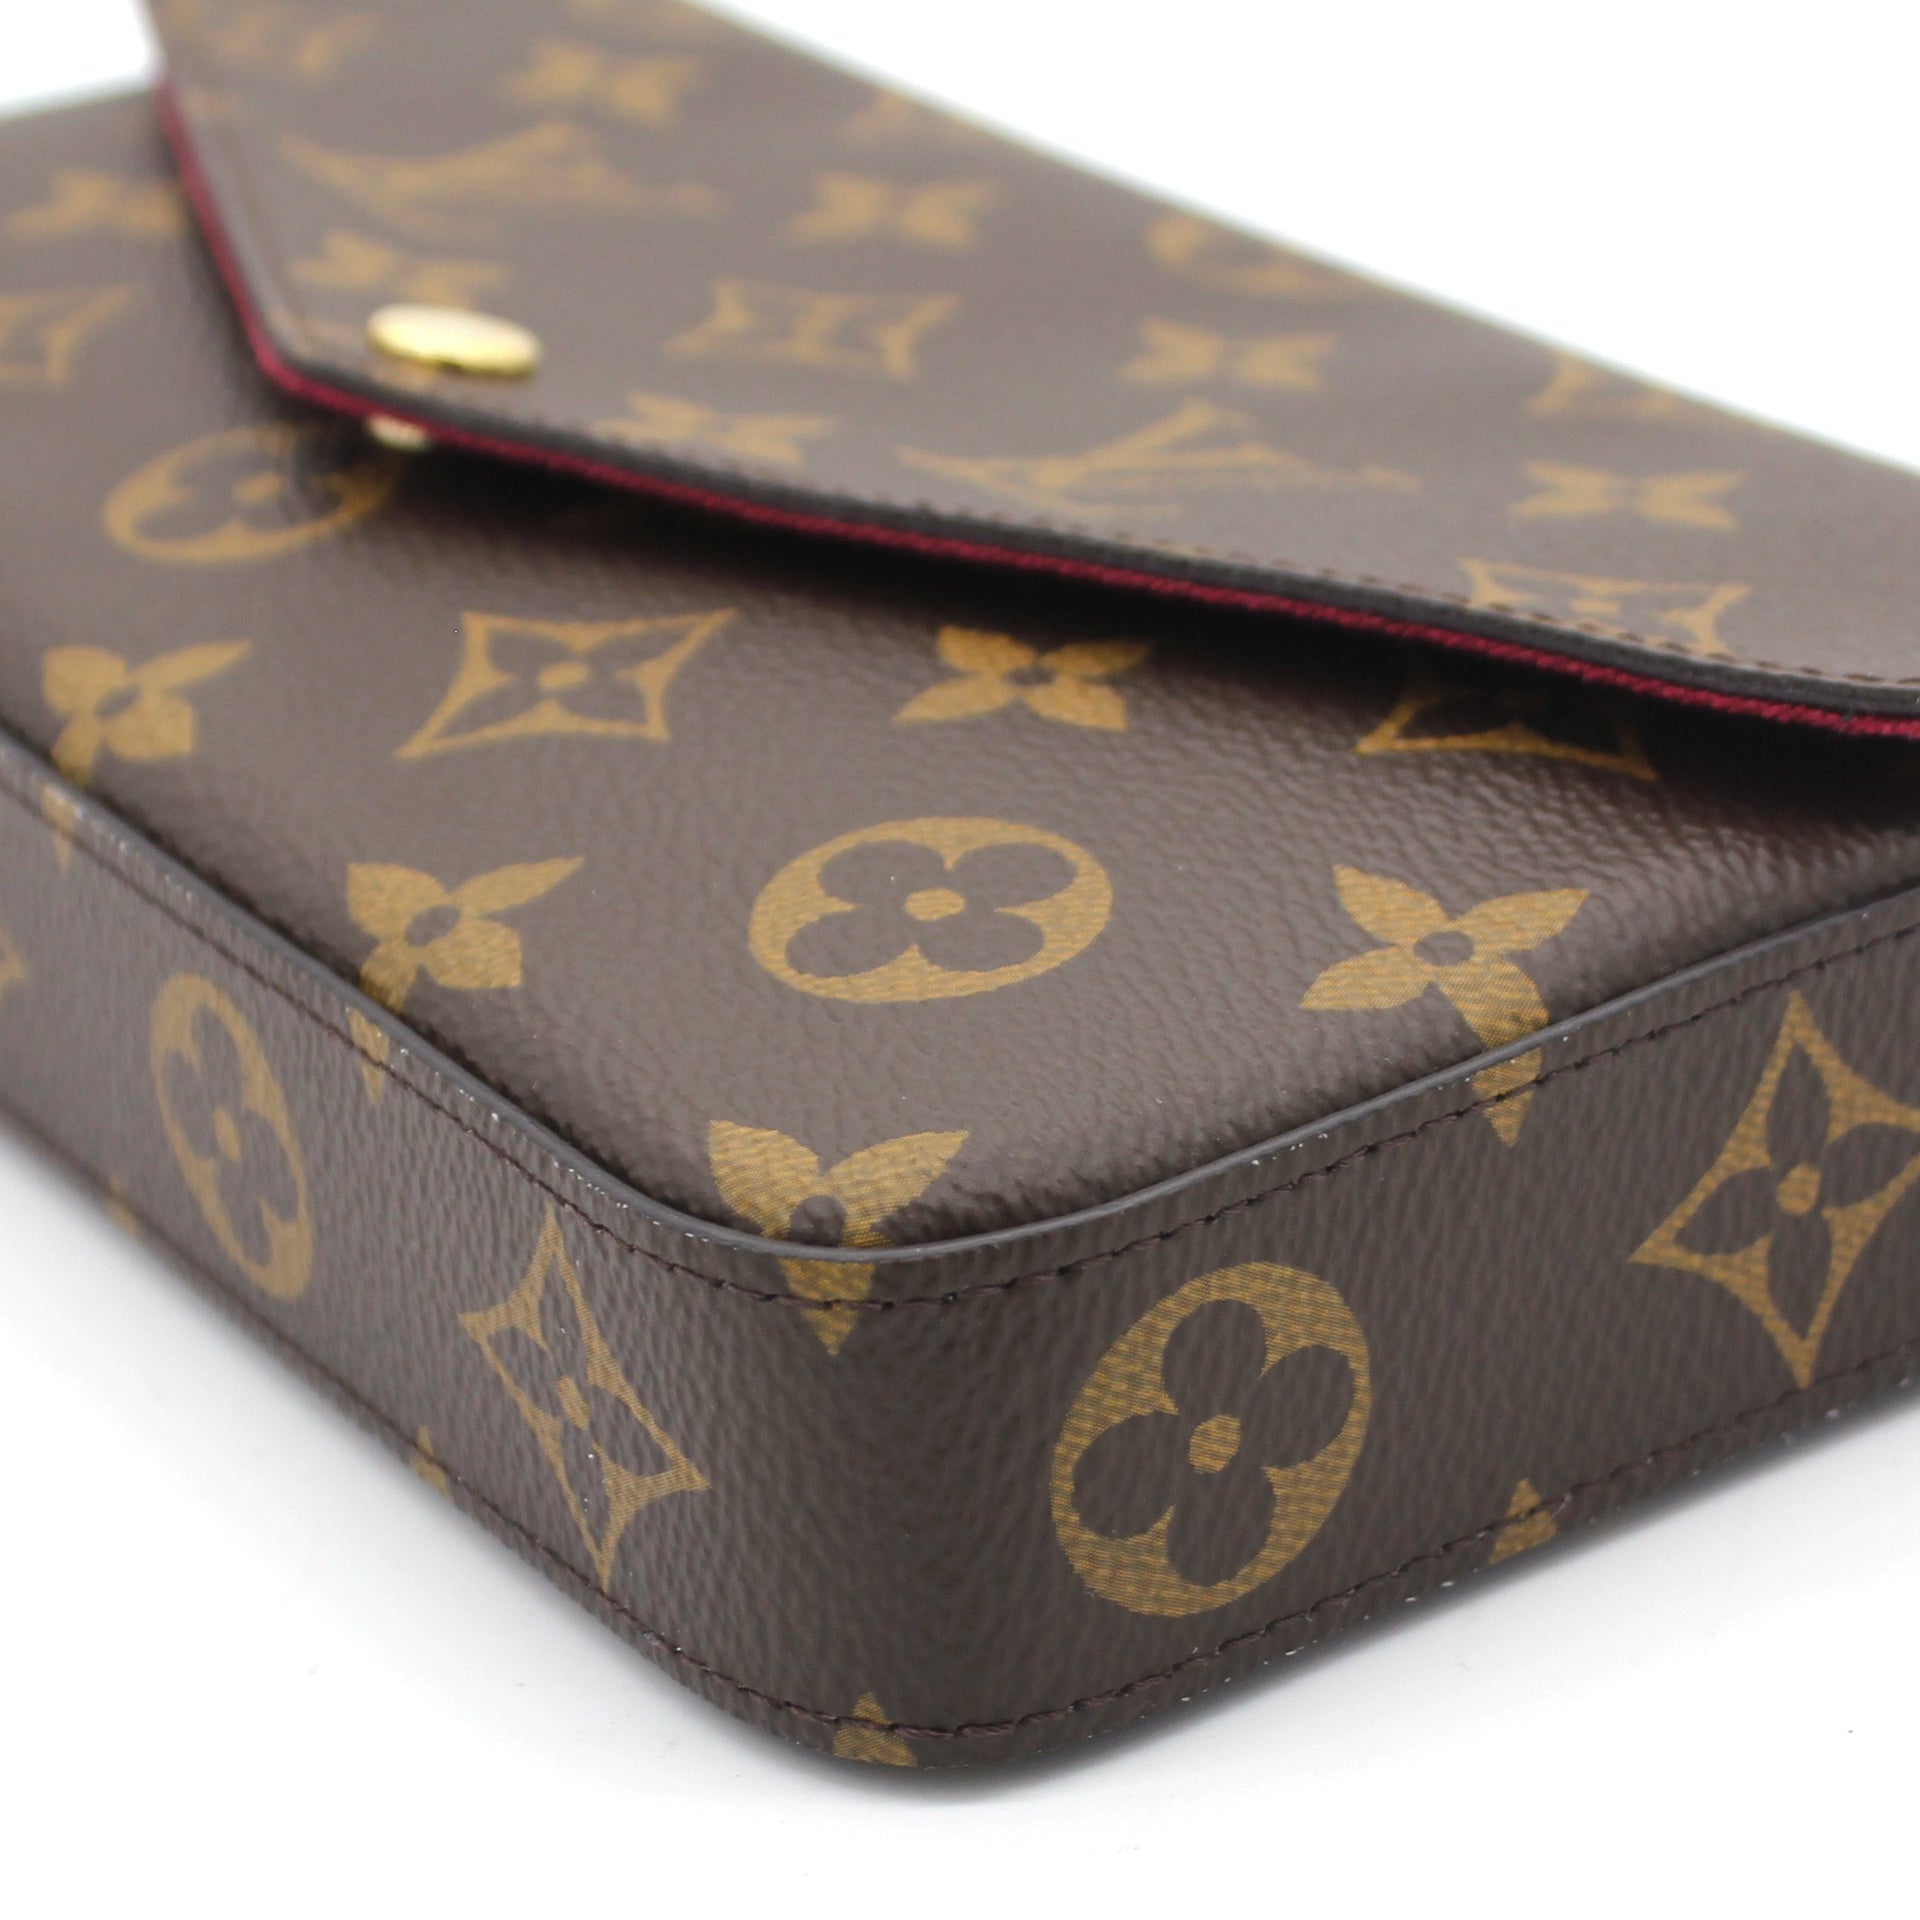 Toiletry Pouch On Chain Monogram Canvas - Wallets and Small Leather Goods